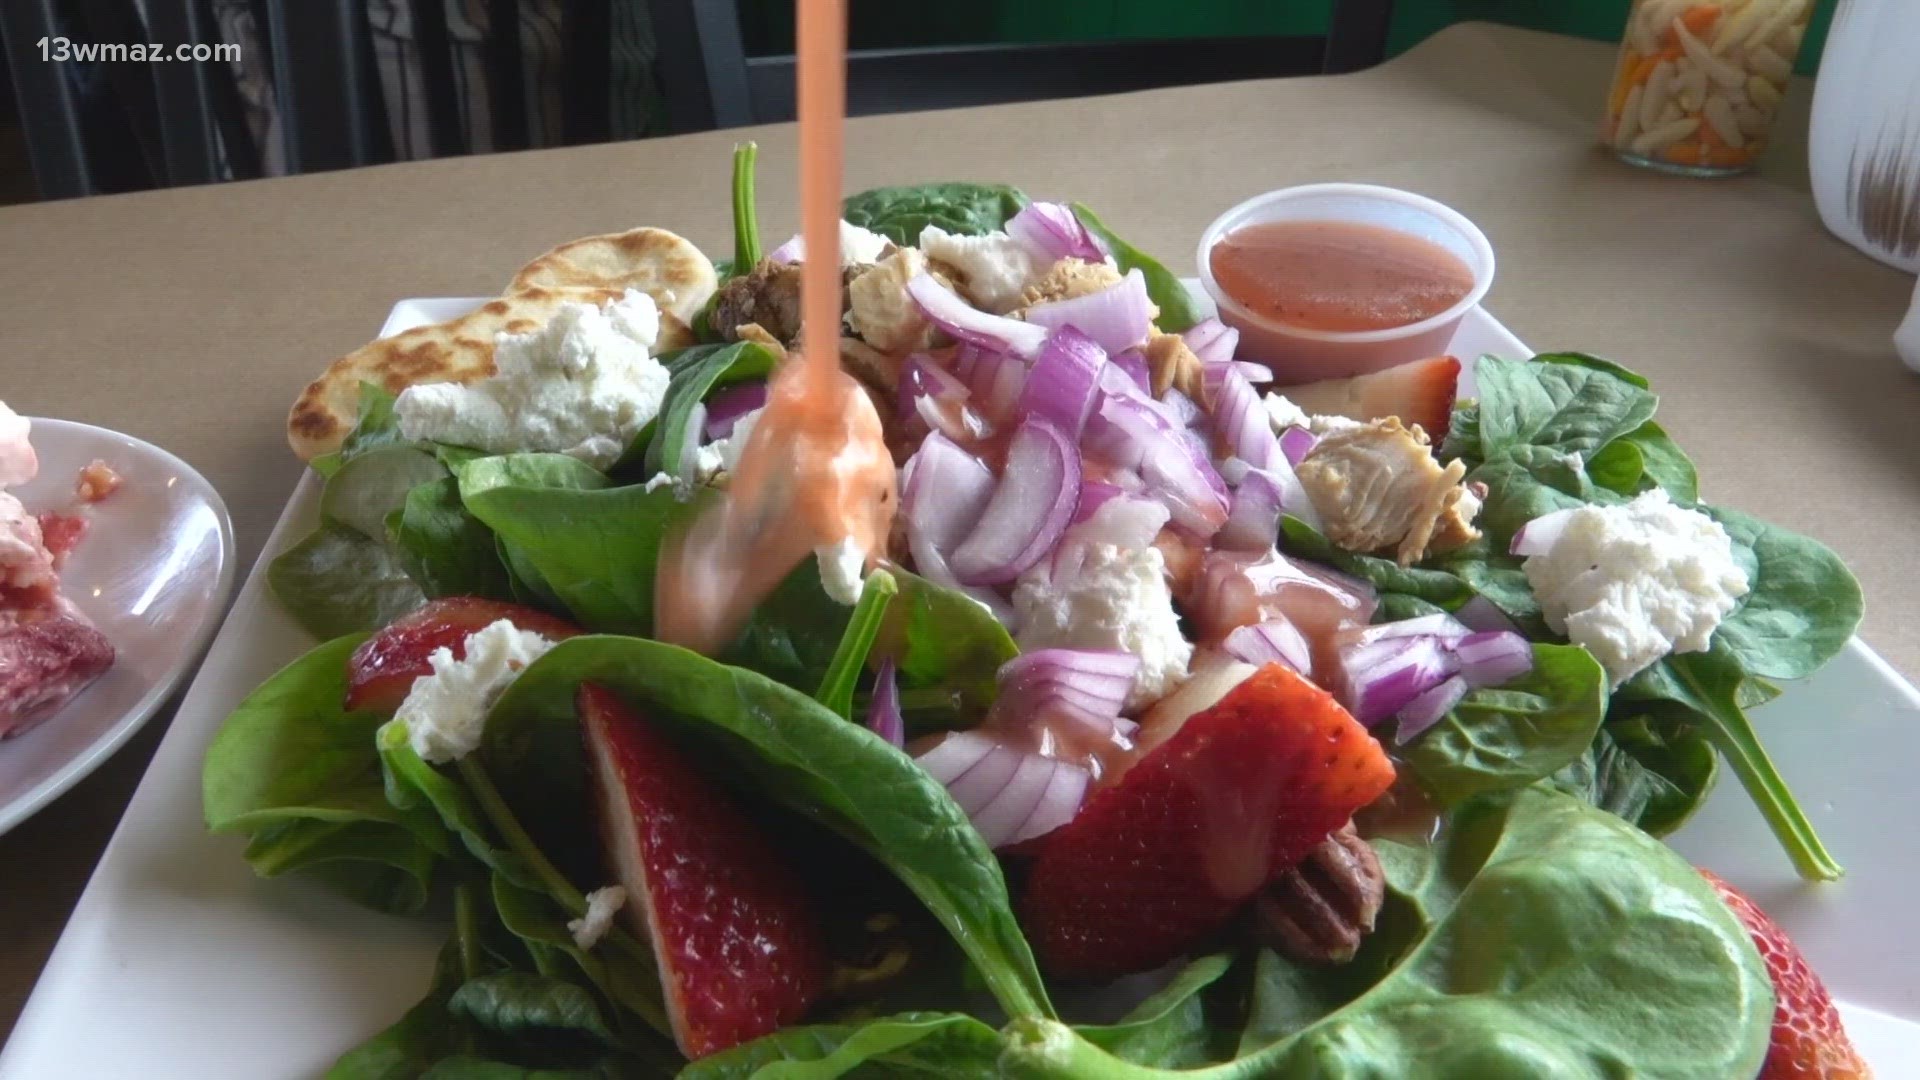 They've introduced a menu of savory salads for all to try, like their spring salad with strawberry vinaigrette.